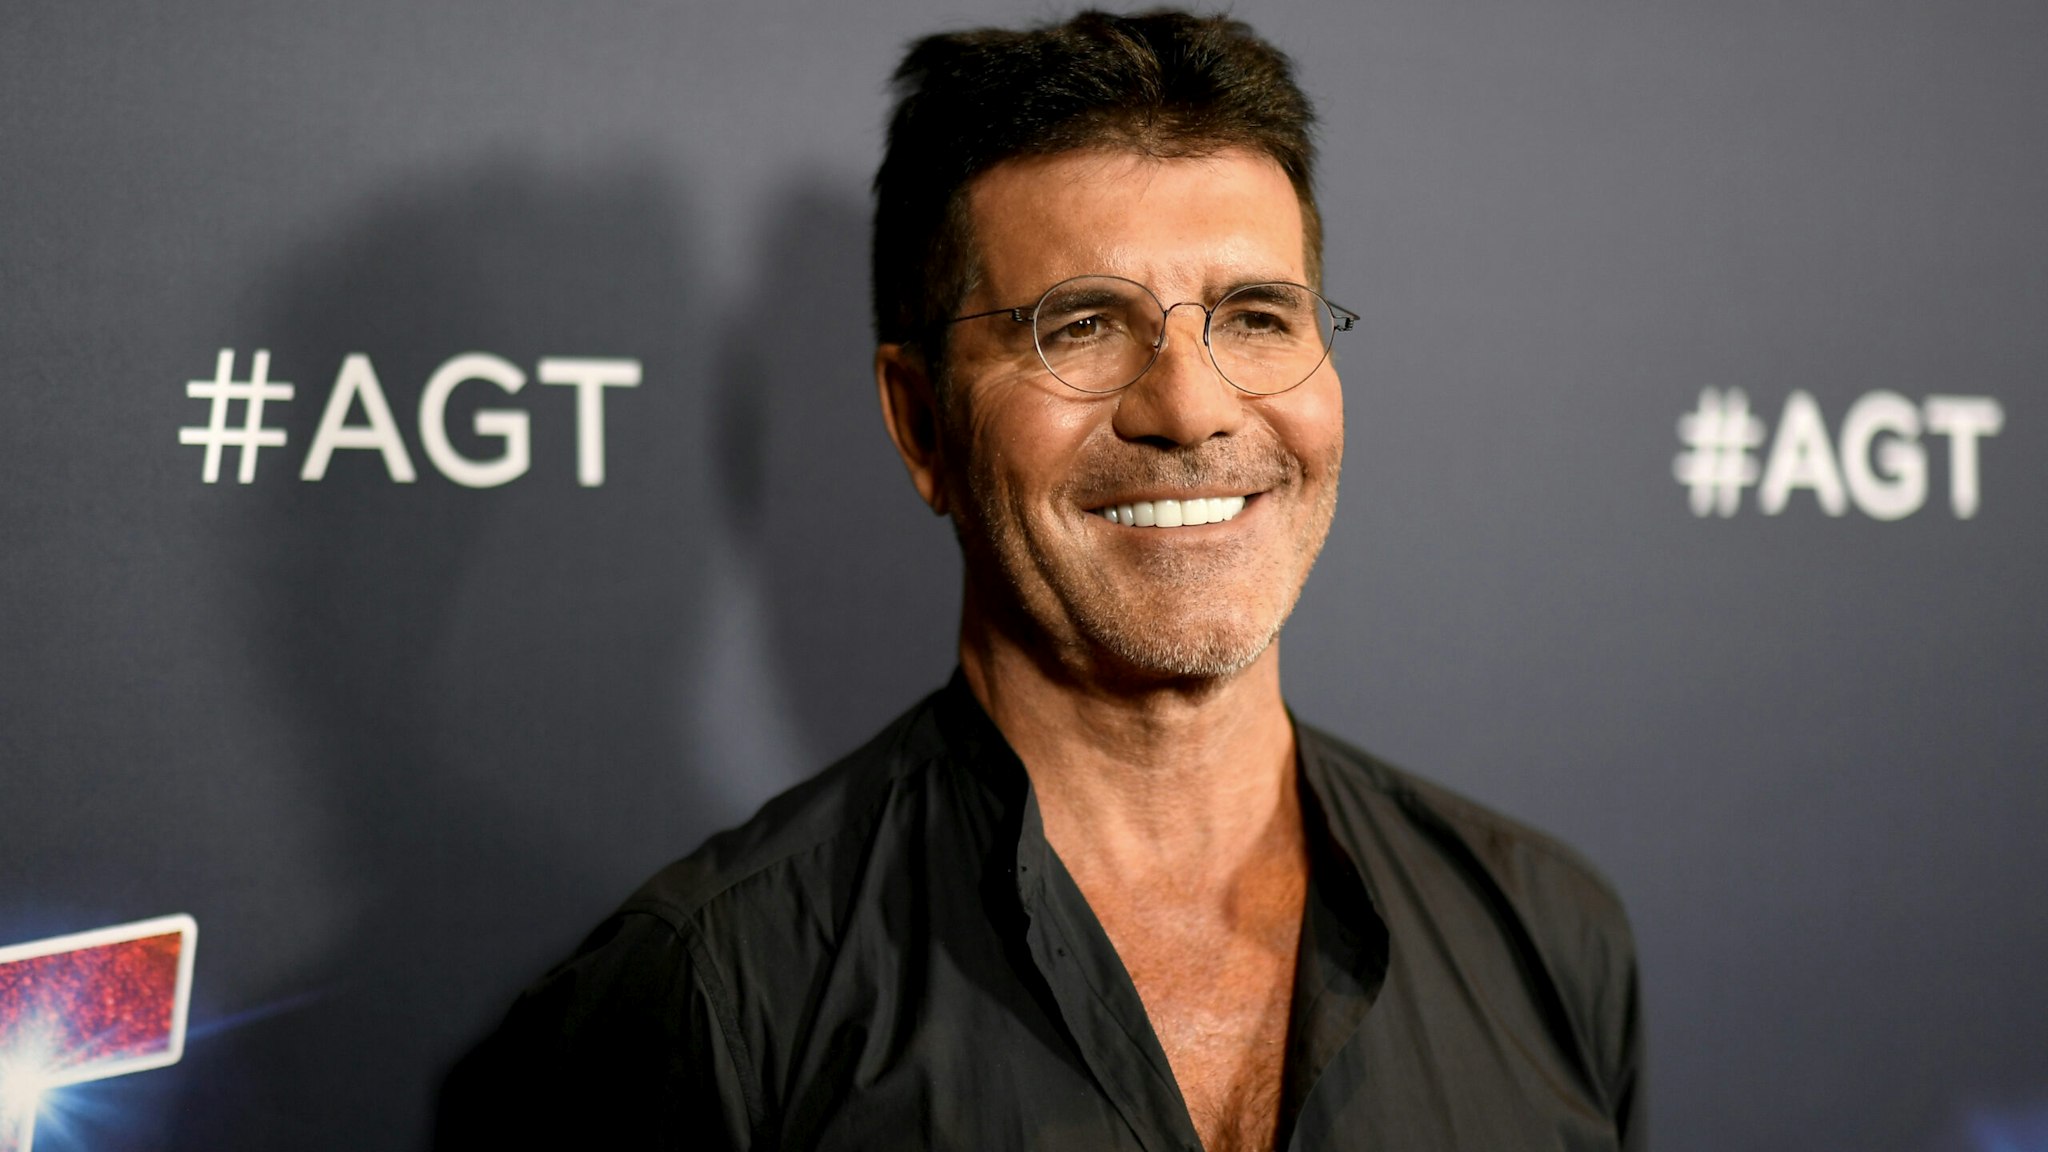 HOLLYWOOD, CALIFORNIA - SEPTEMBER 17: Simon Cowell attends "America's Got Talent" Season 14 Live Show Red Carpet at Dolby Theatre on September 17, 2019 in Hollywood, California.